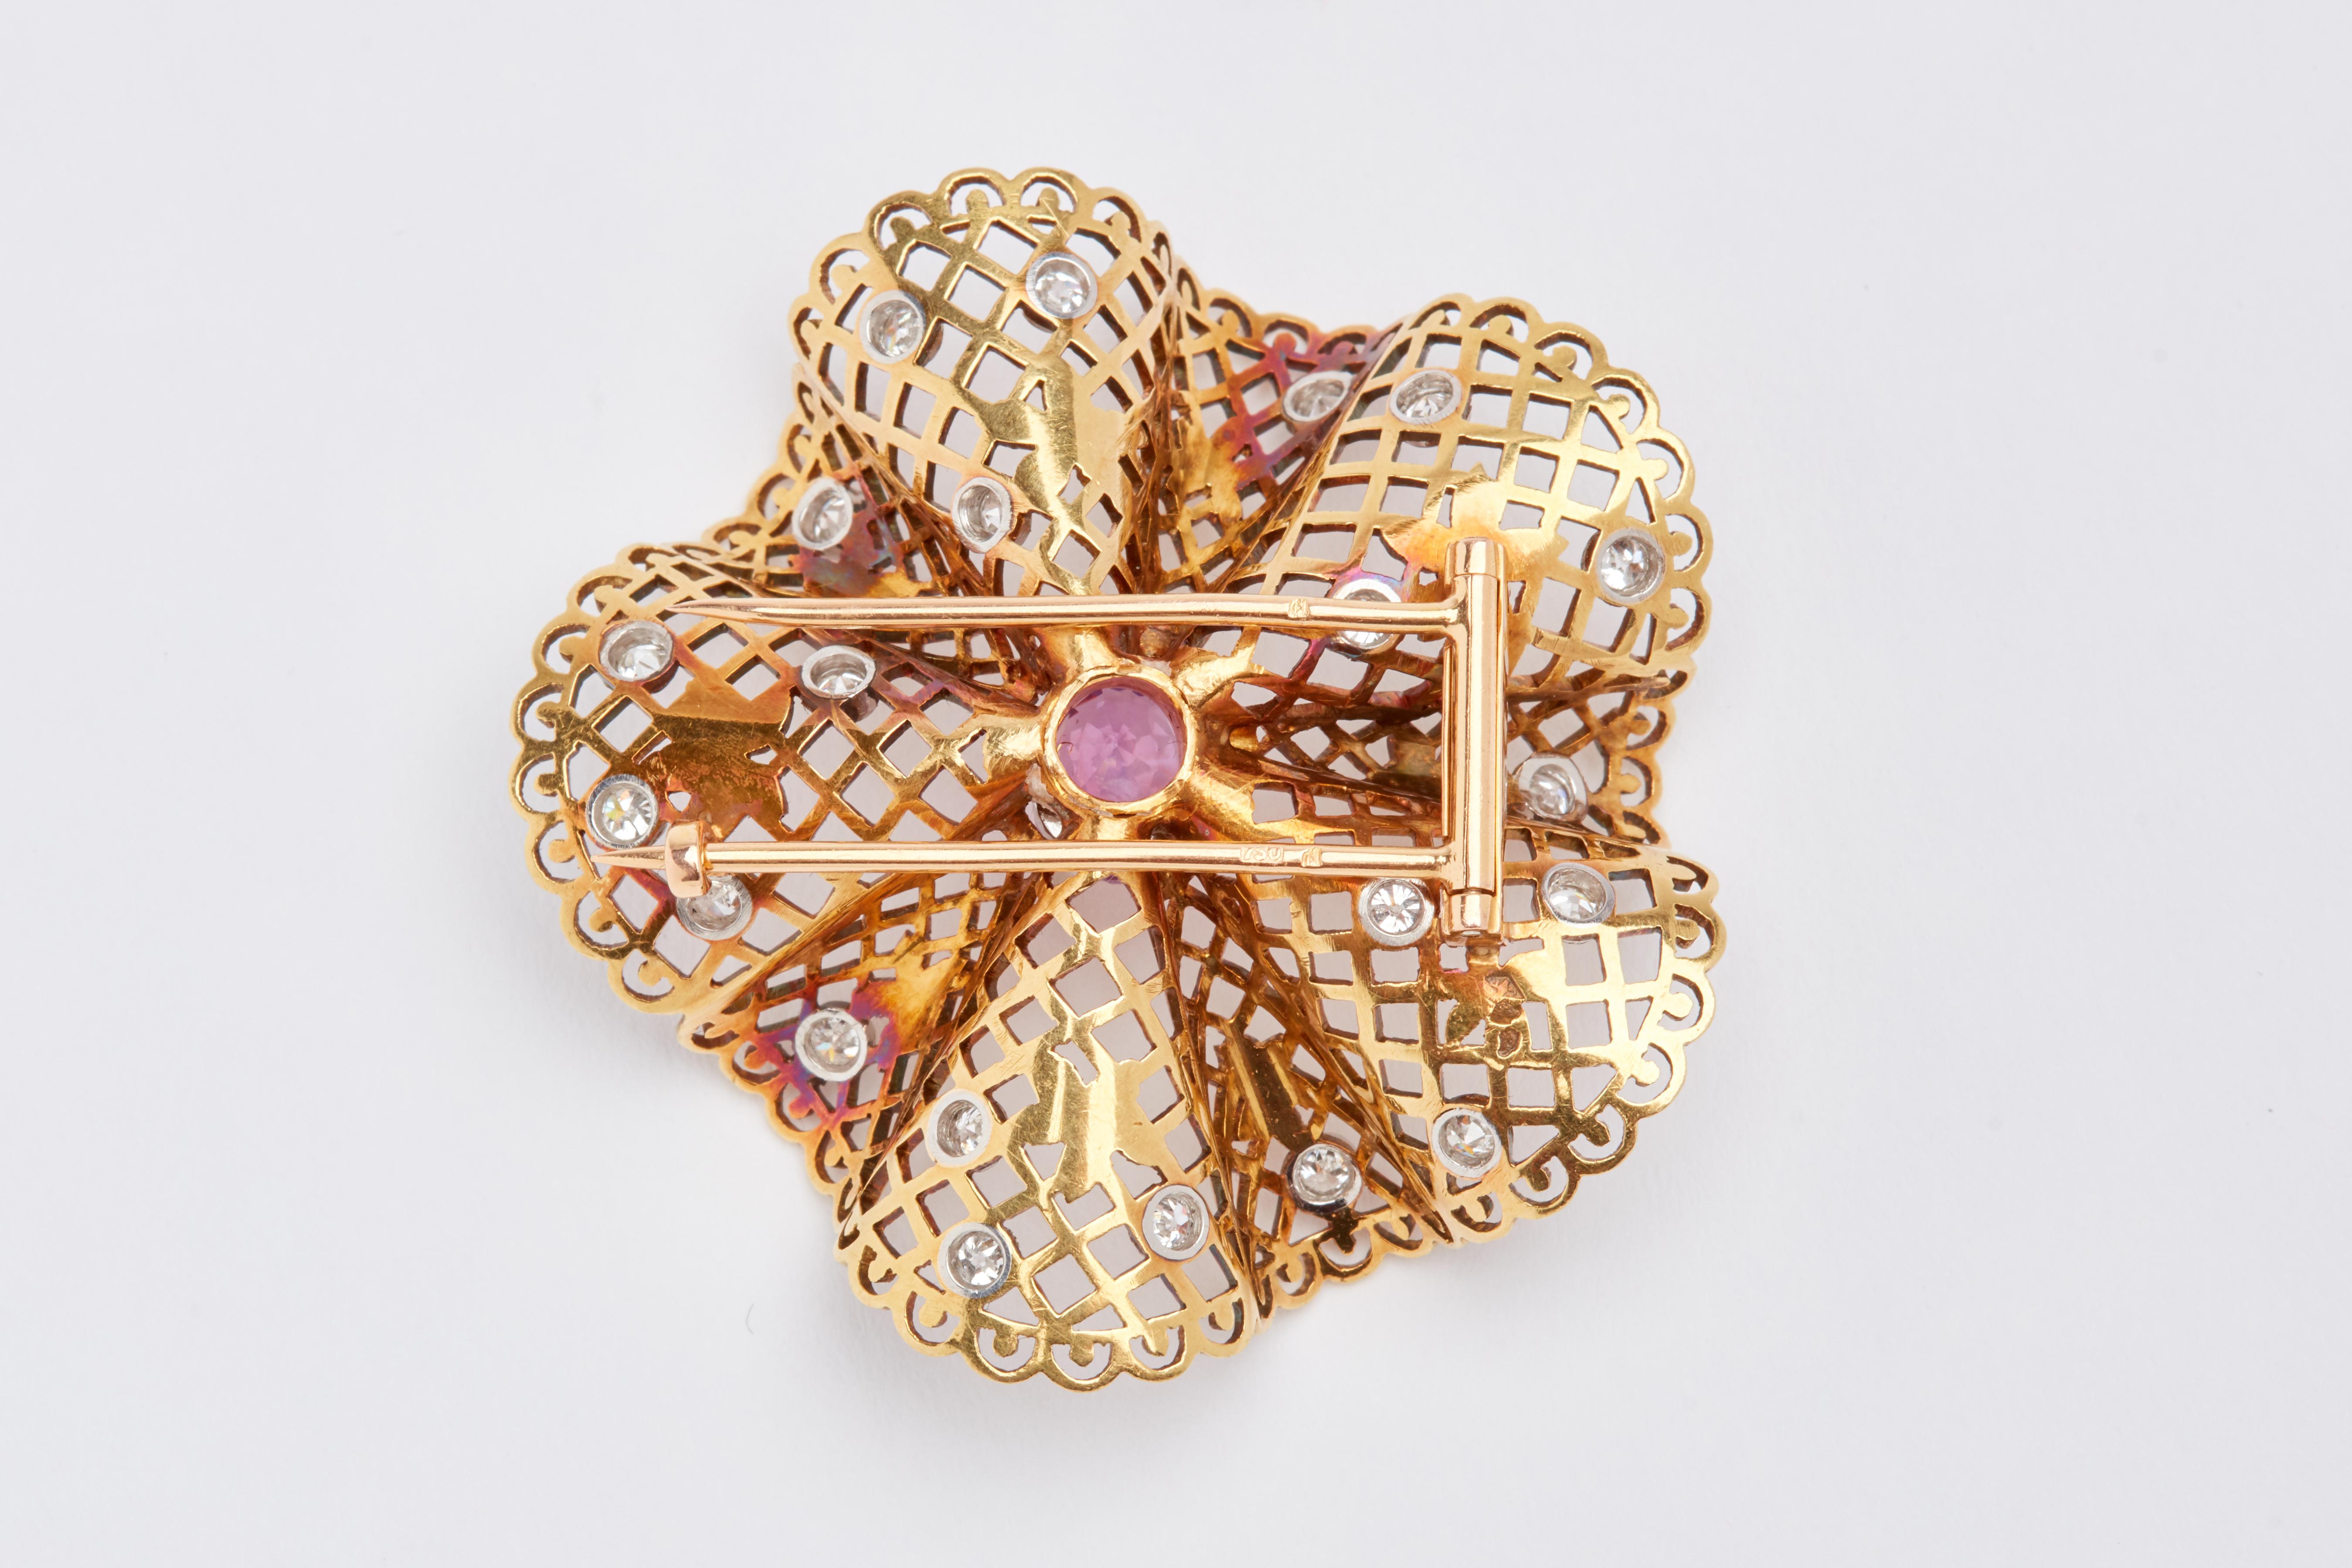 Gold Filligree brooch with pink sapphires and diamonds. Center Stone is a oval cut pink sapphire weight approx 1.75 carats. 20 white old European cut diamonds weighing aprox 2 carat total. 2 inches by 2 inches. 